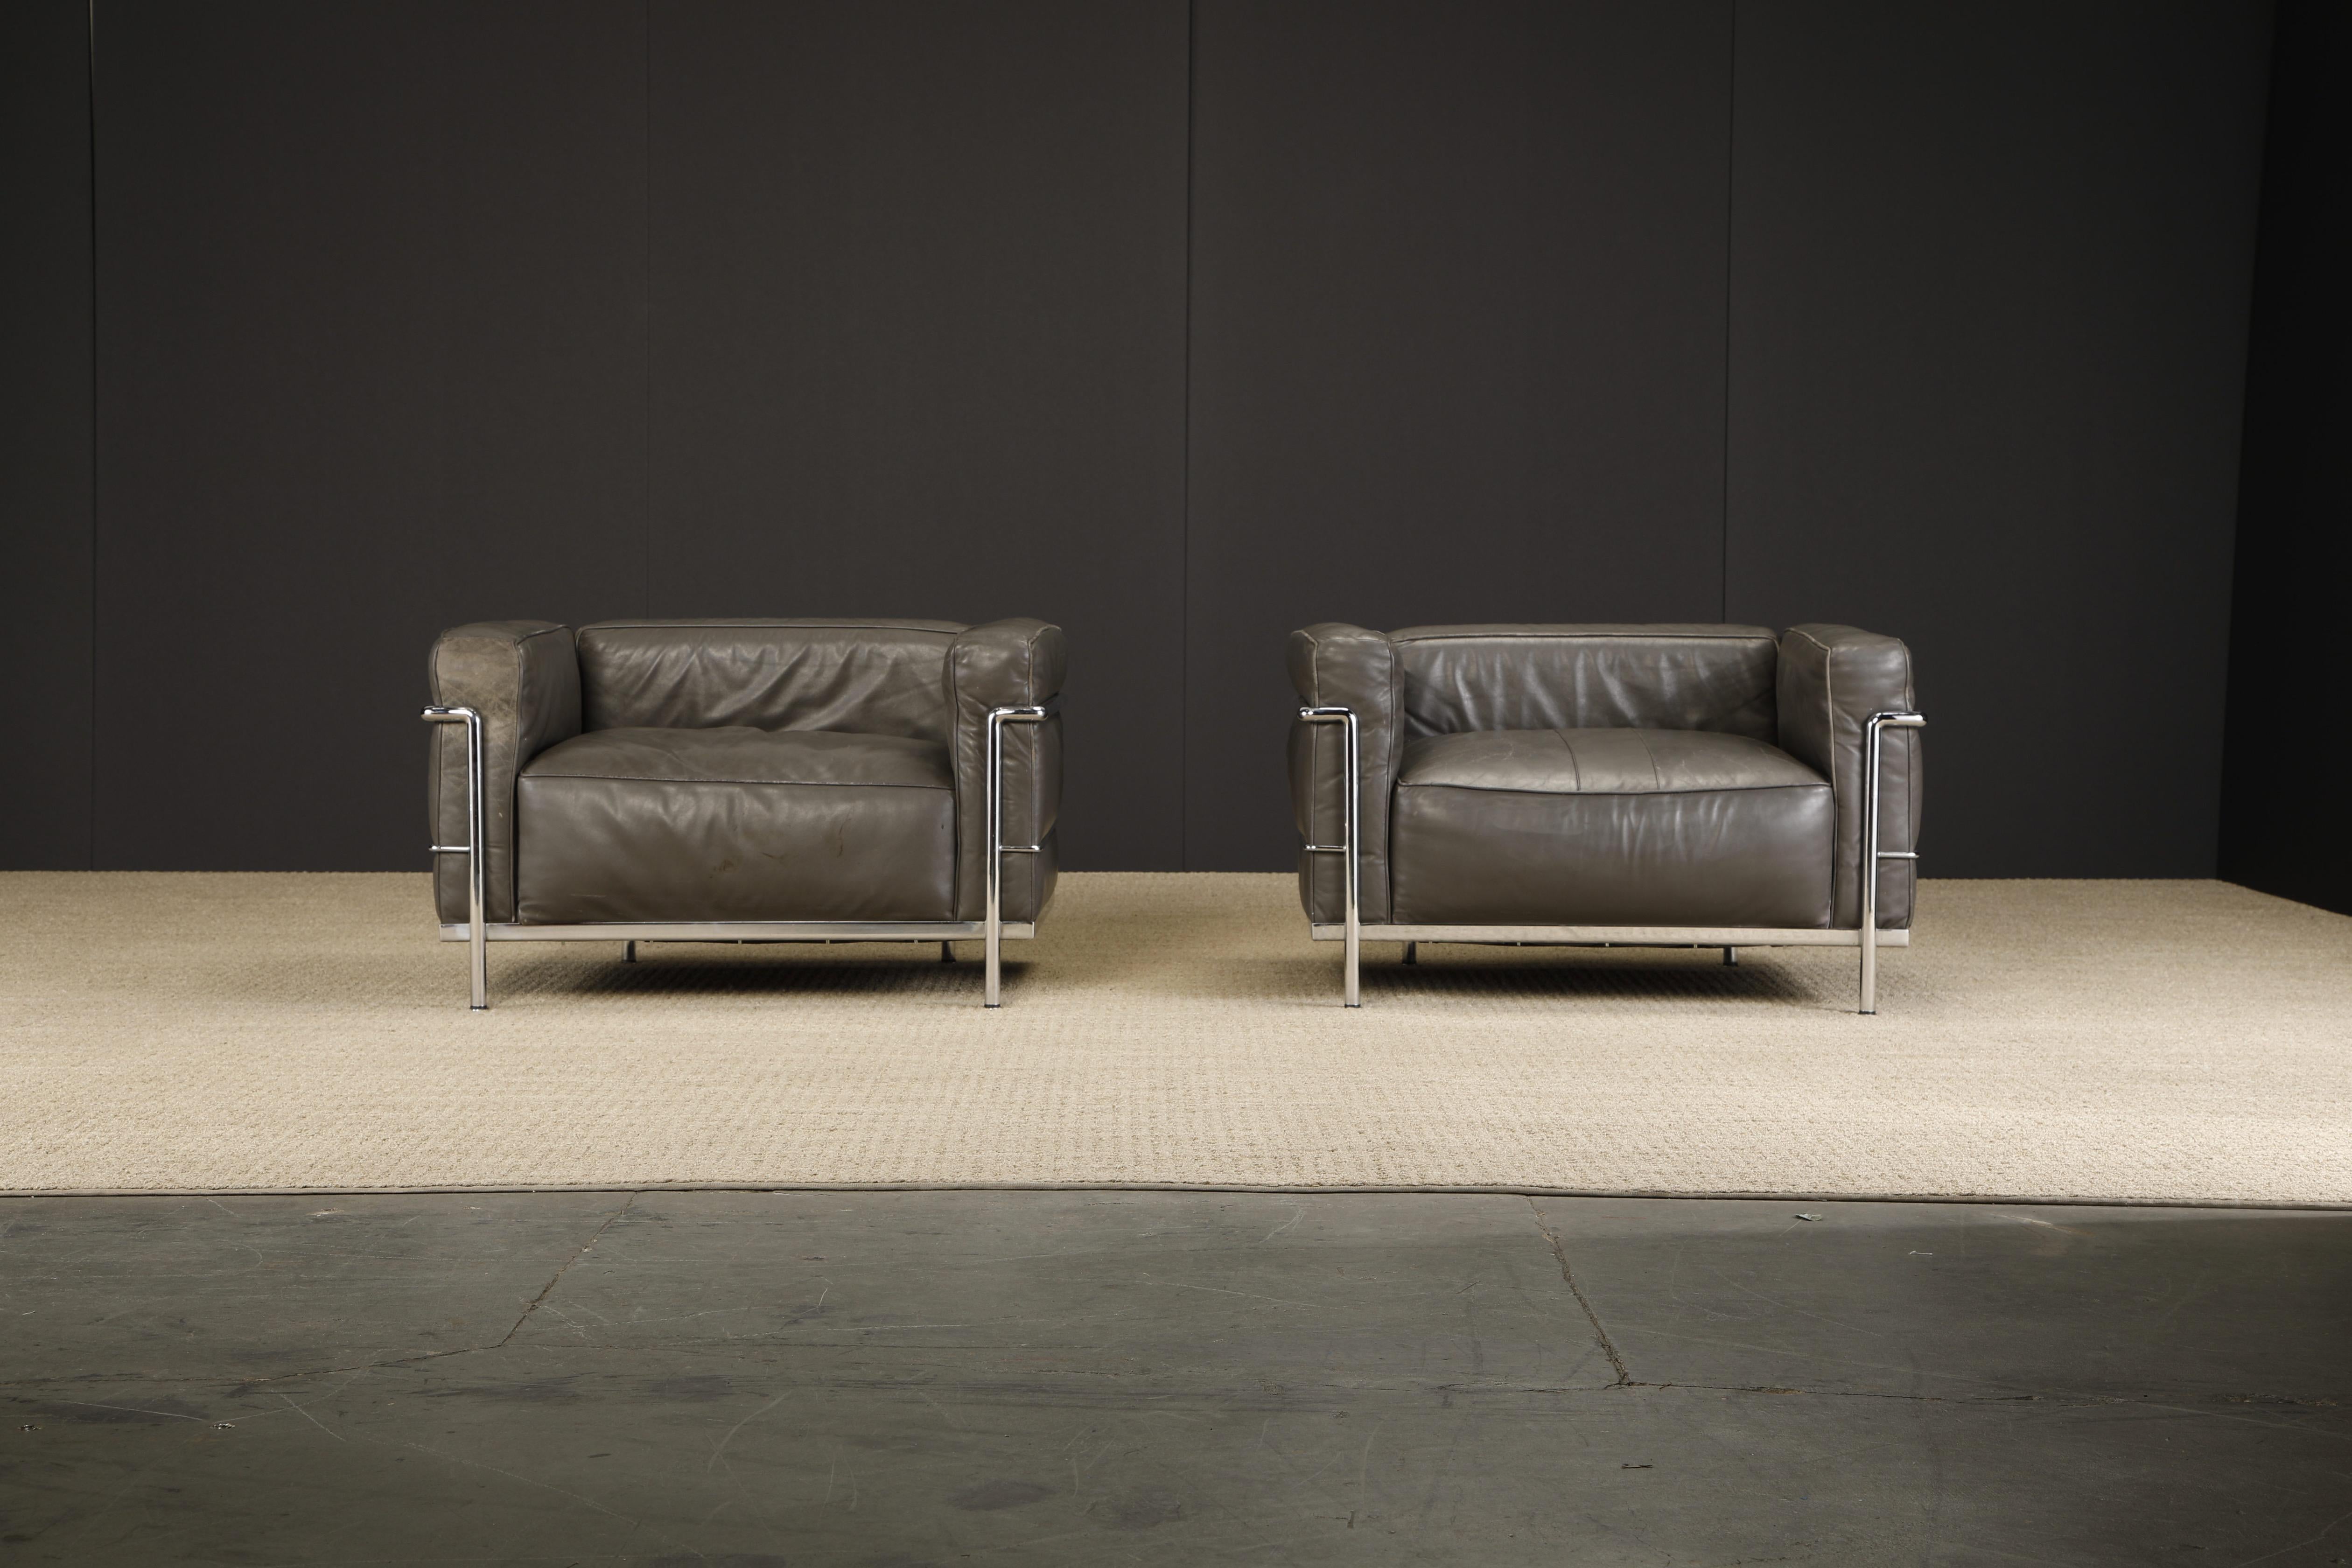 An incredible pair of early production year (ideal for collectors) 'LC3' club chairs in grey leather, by Le Corbusier, Pierre Jeanneret and Charlotte Perriand for Cassina, circa 1970s, both chairs are signed with Cassina model and early inventory